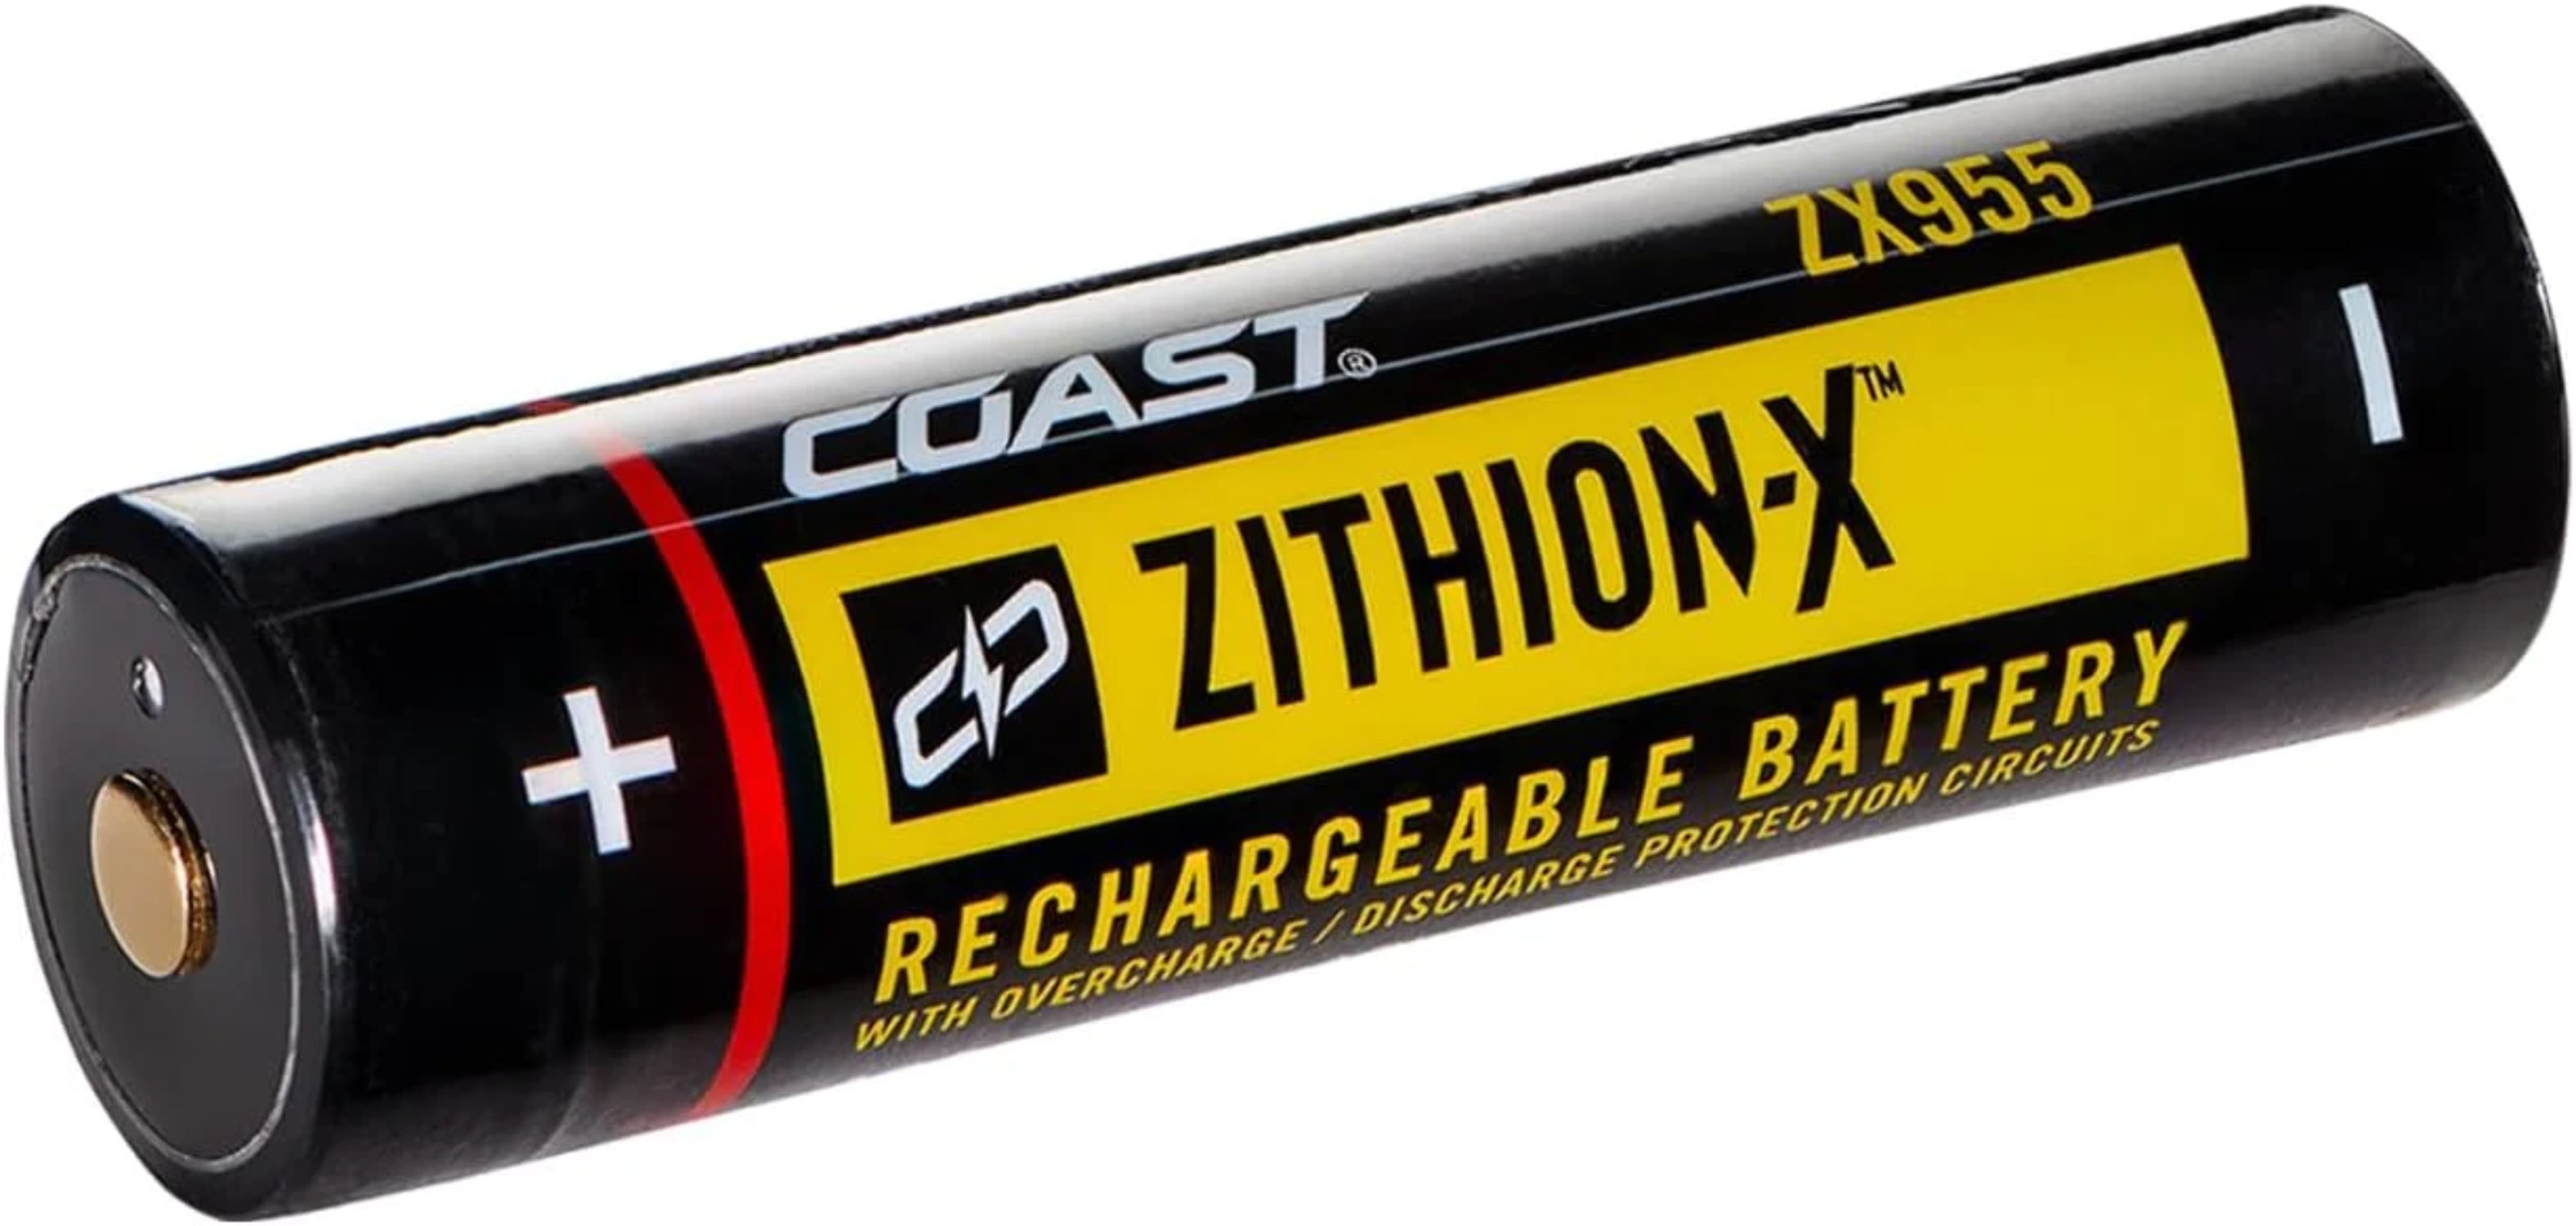 Coast ZX955 ZITHION-X Li-Ion Rechargeable Battery for The EAL18, PM300,  PM310, and XPH34R LED Lights, Black